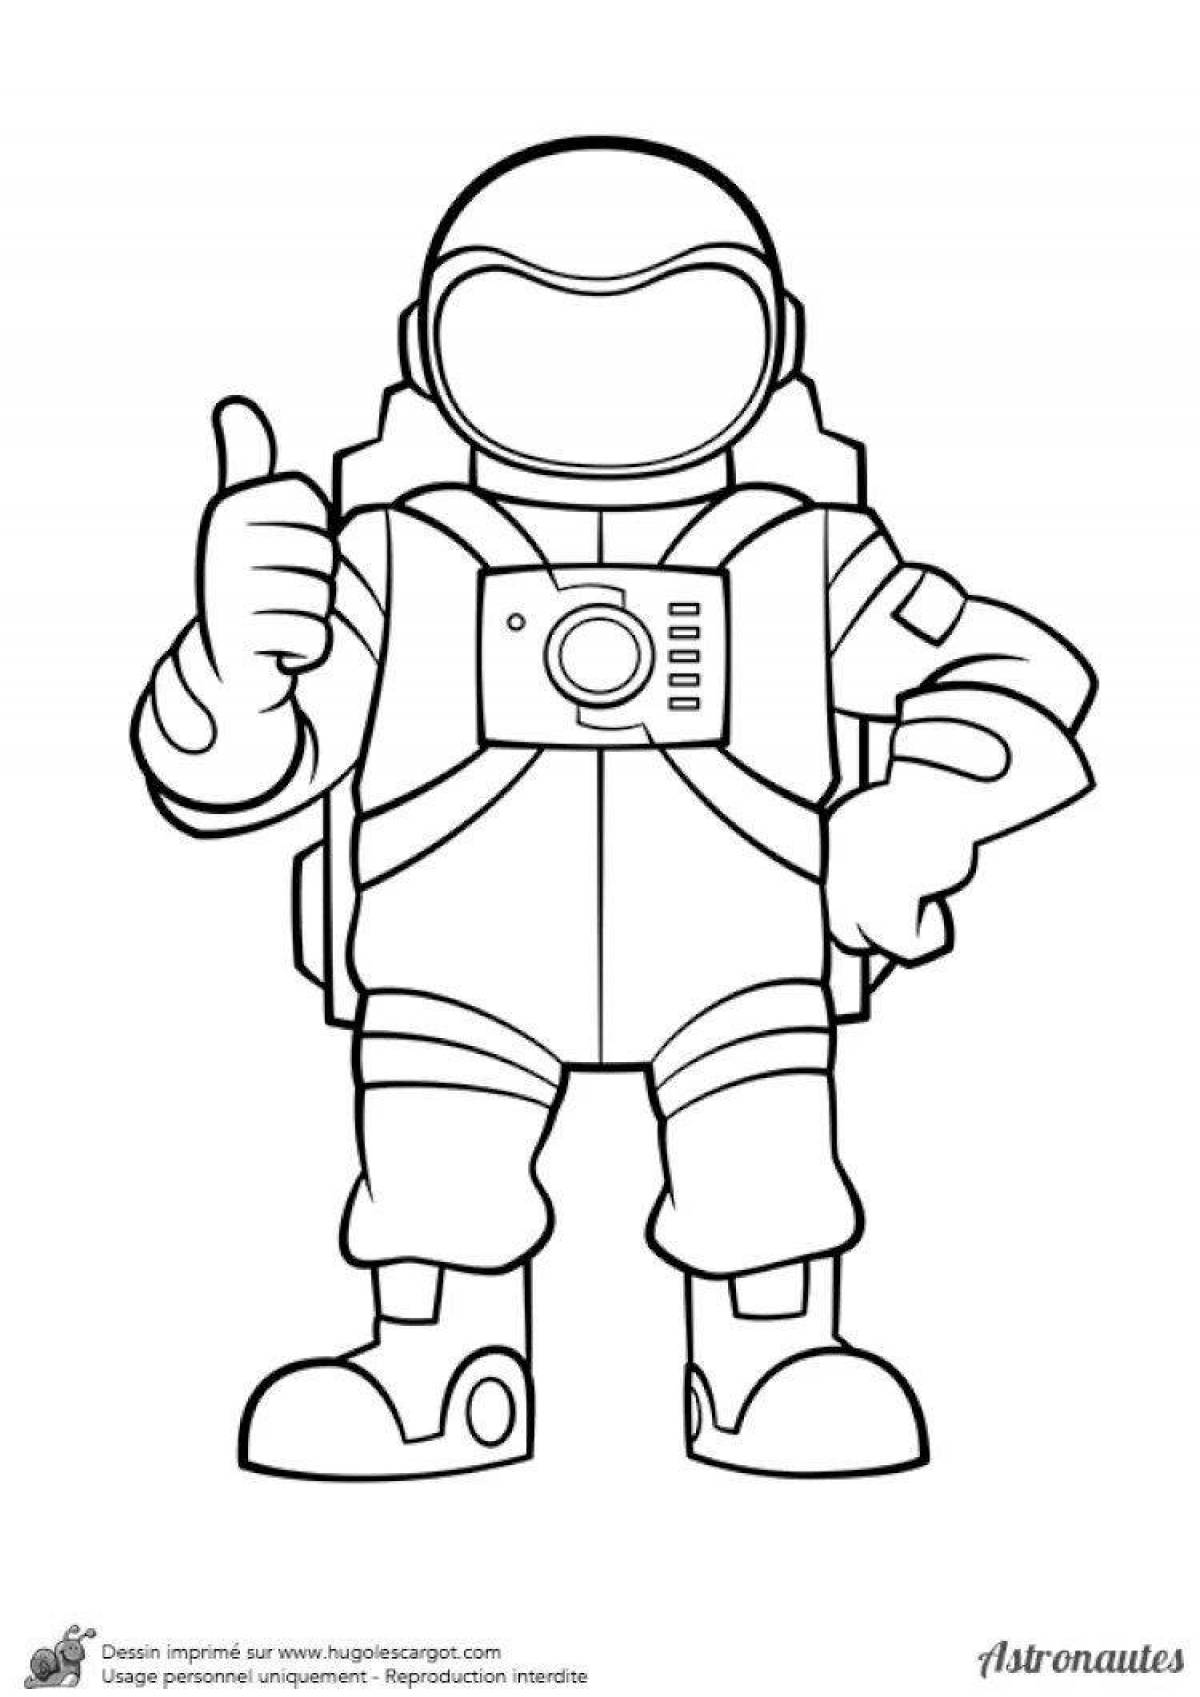 A bold astronaut in a spacesuit